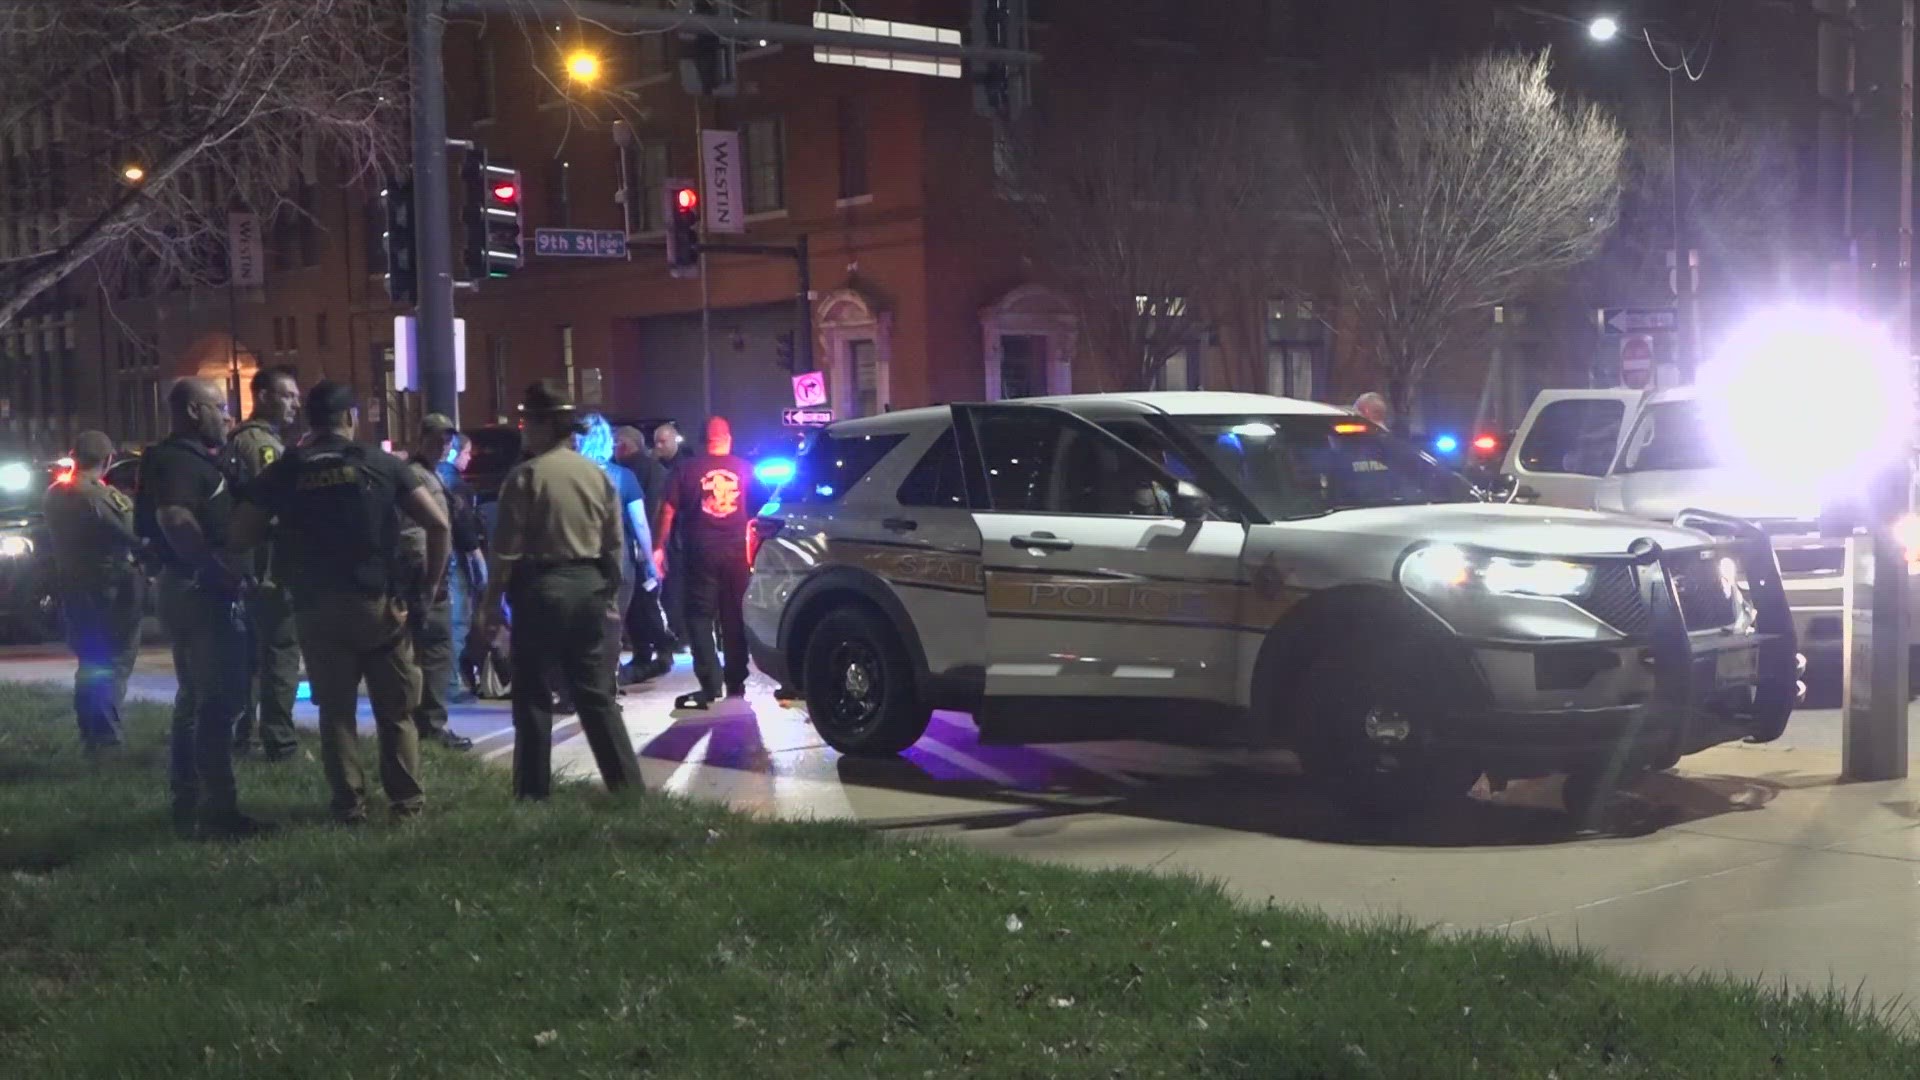 The police pursuit ended right by Busch Stadium in downtown St. Louis. One person was taken into custody.